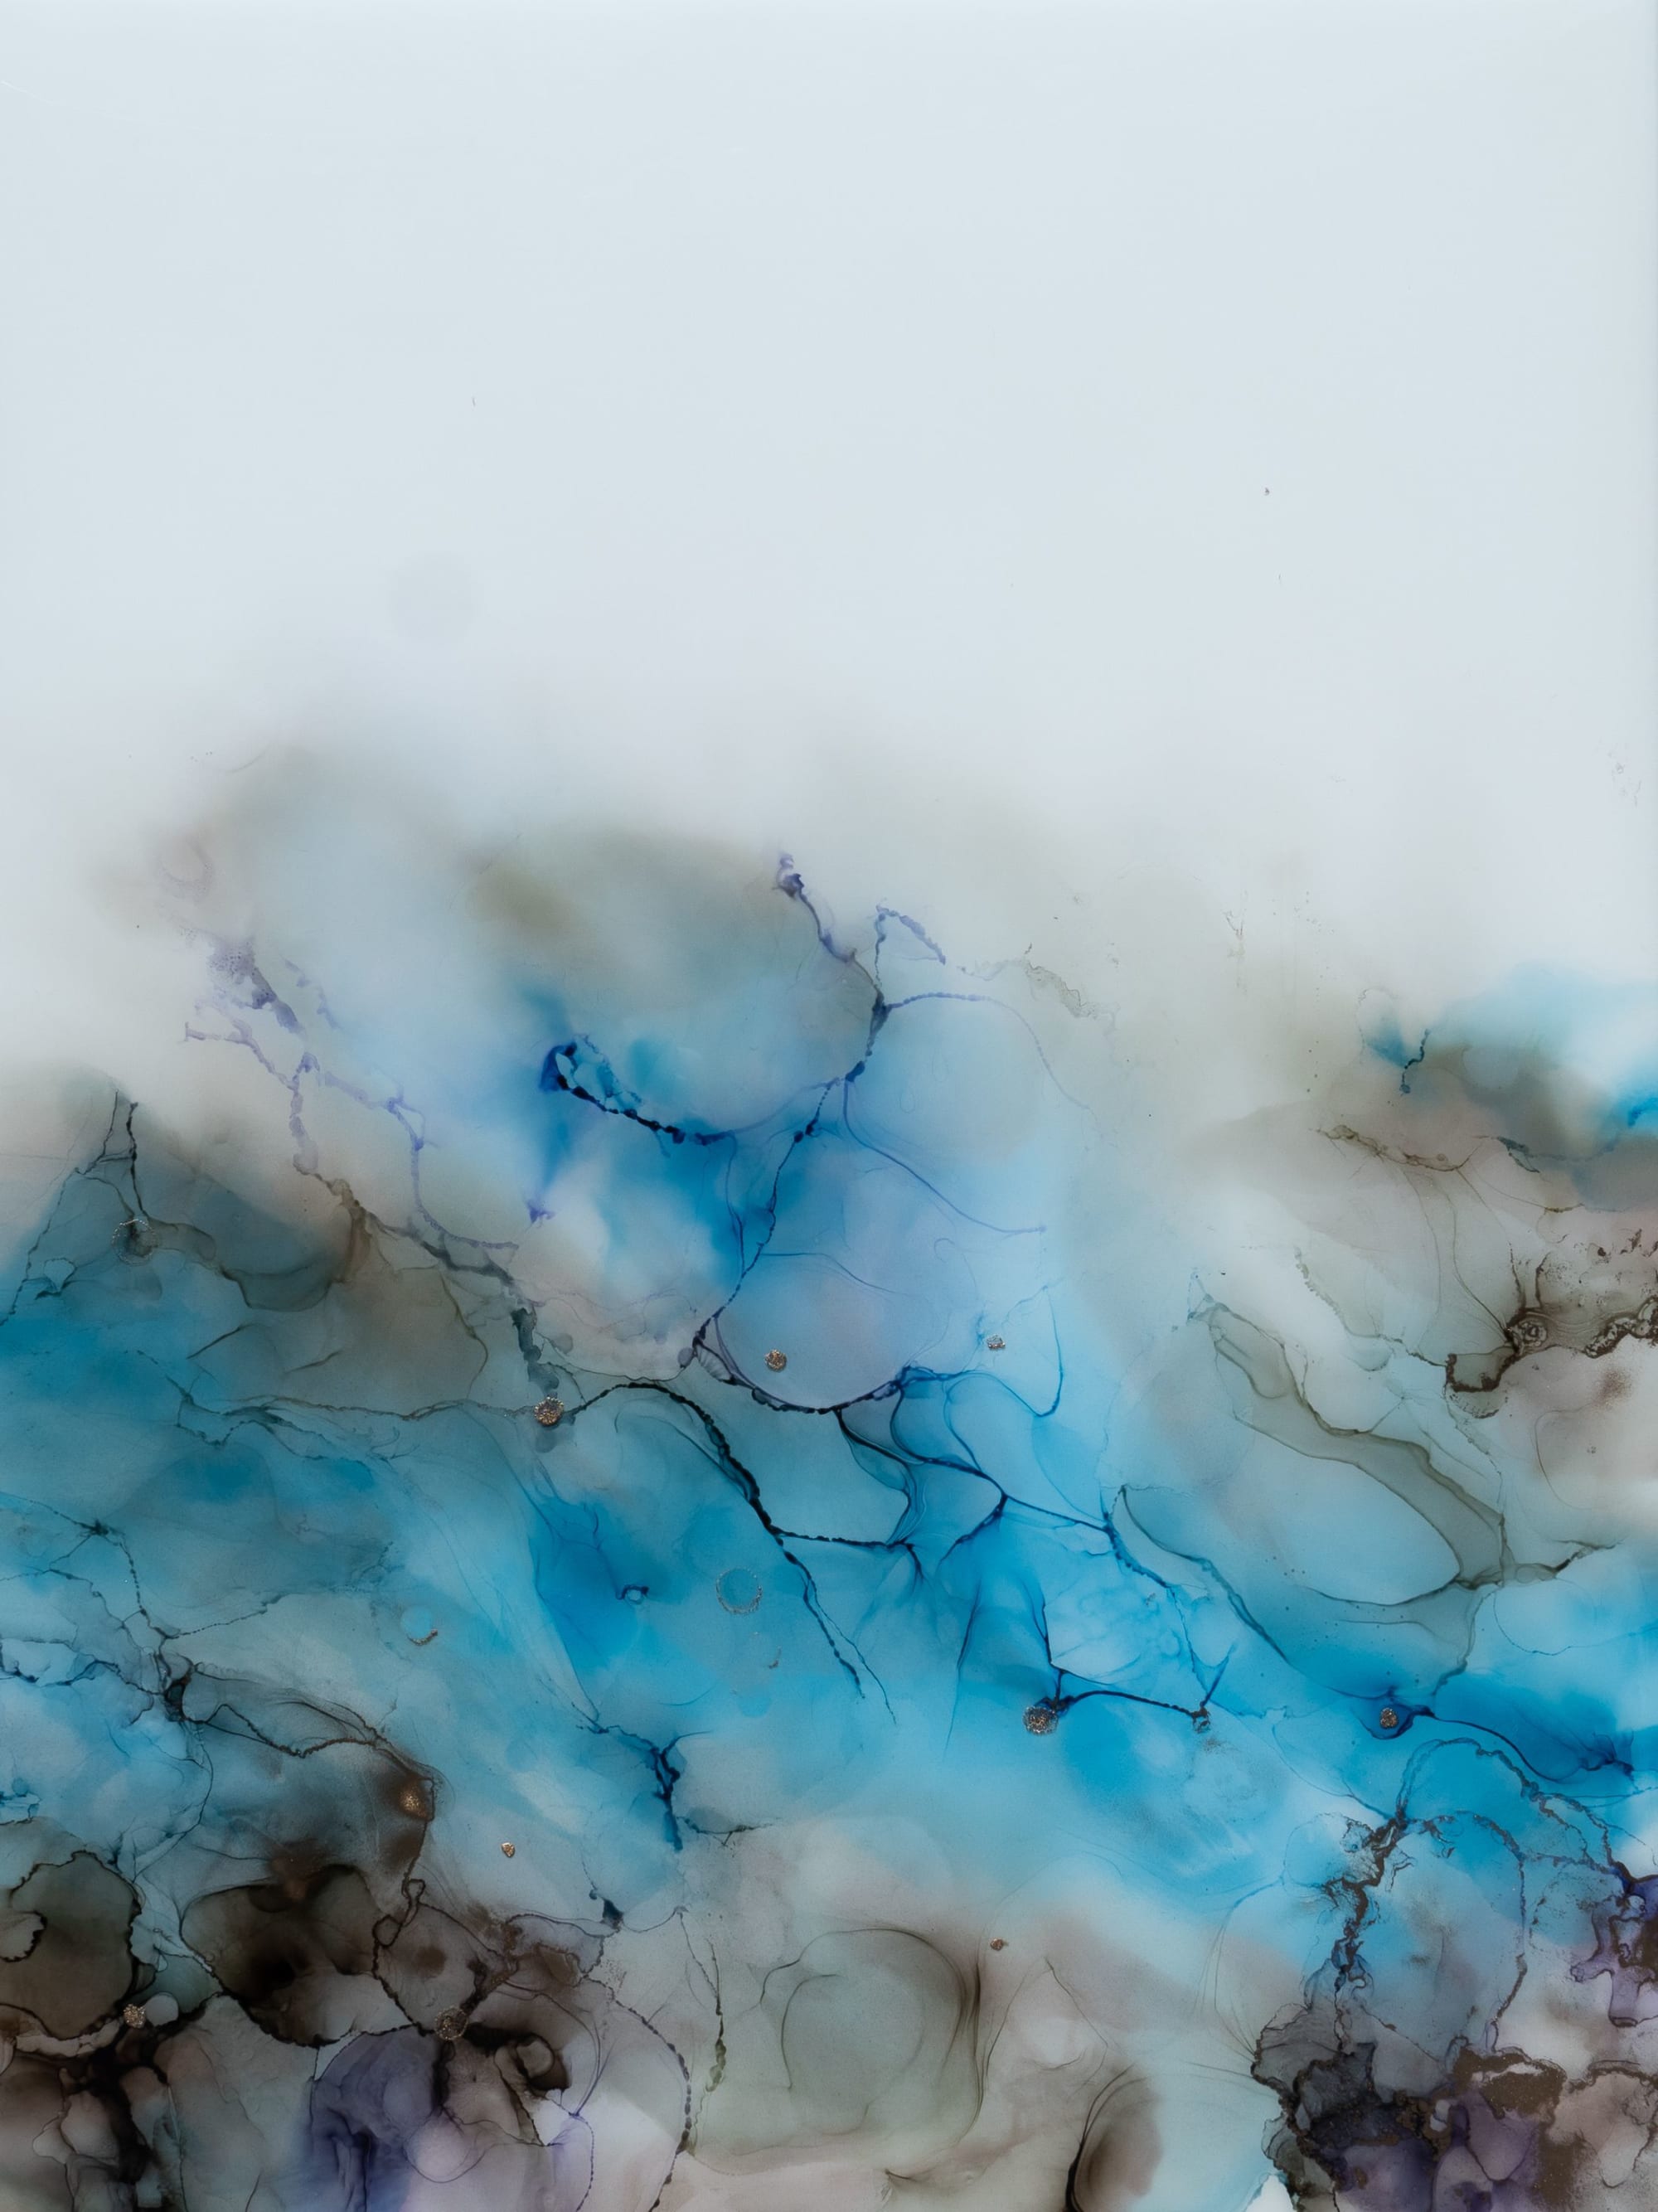 FLUID IX' - Luxury Multi-Layered Resin and Alcohol Inks Art by Christina  Twomey Art + Design